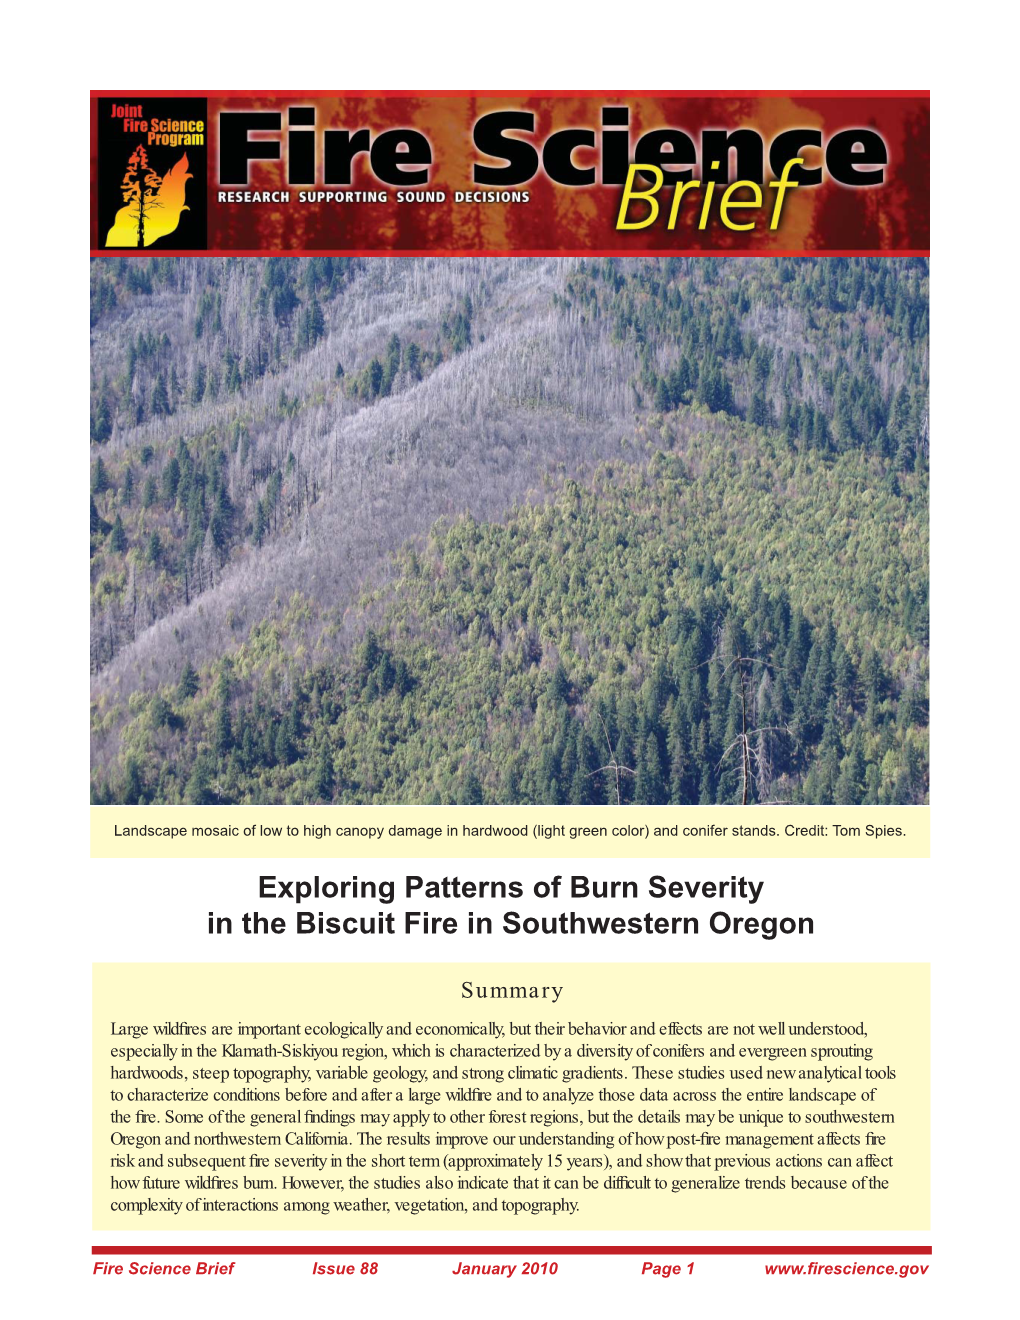 Exploring Patterns of Burn Severity in the Biscuit Fire in Southwestern Oregon